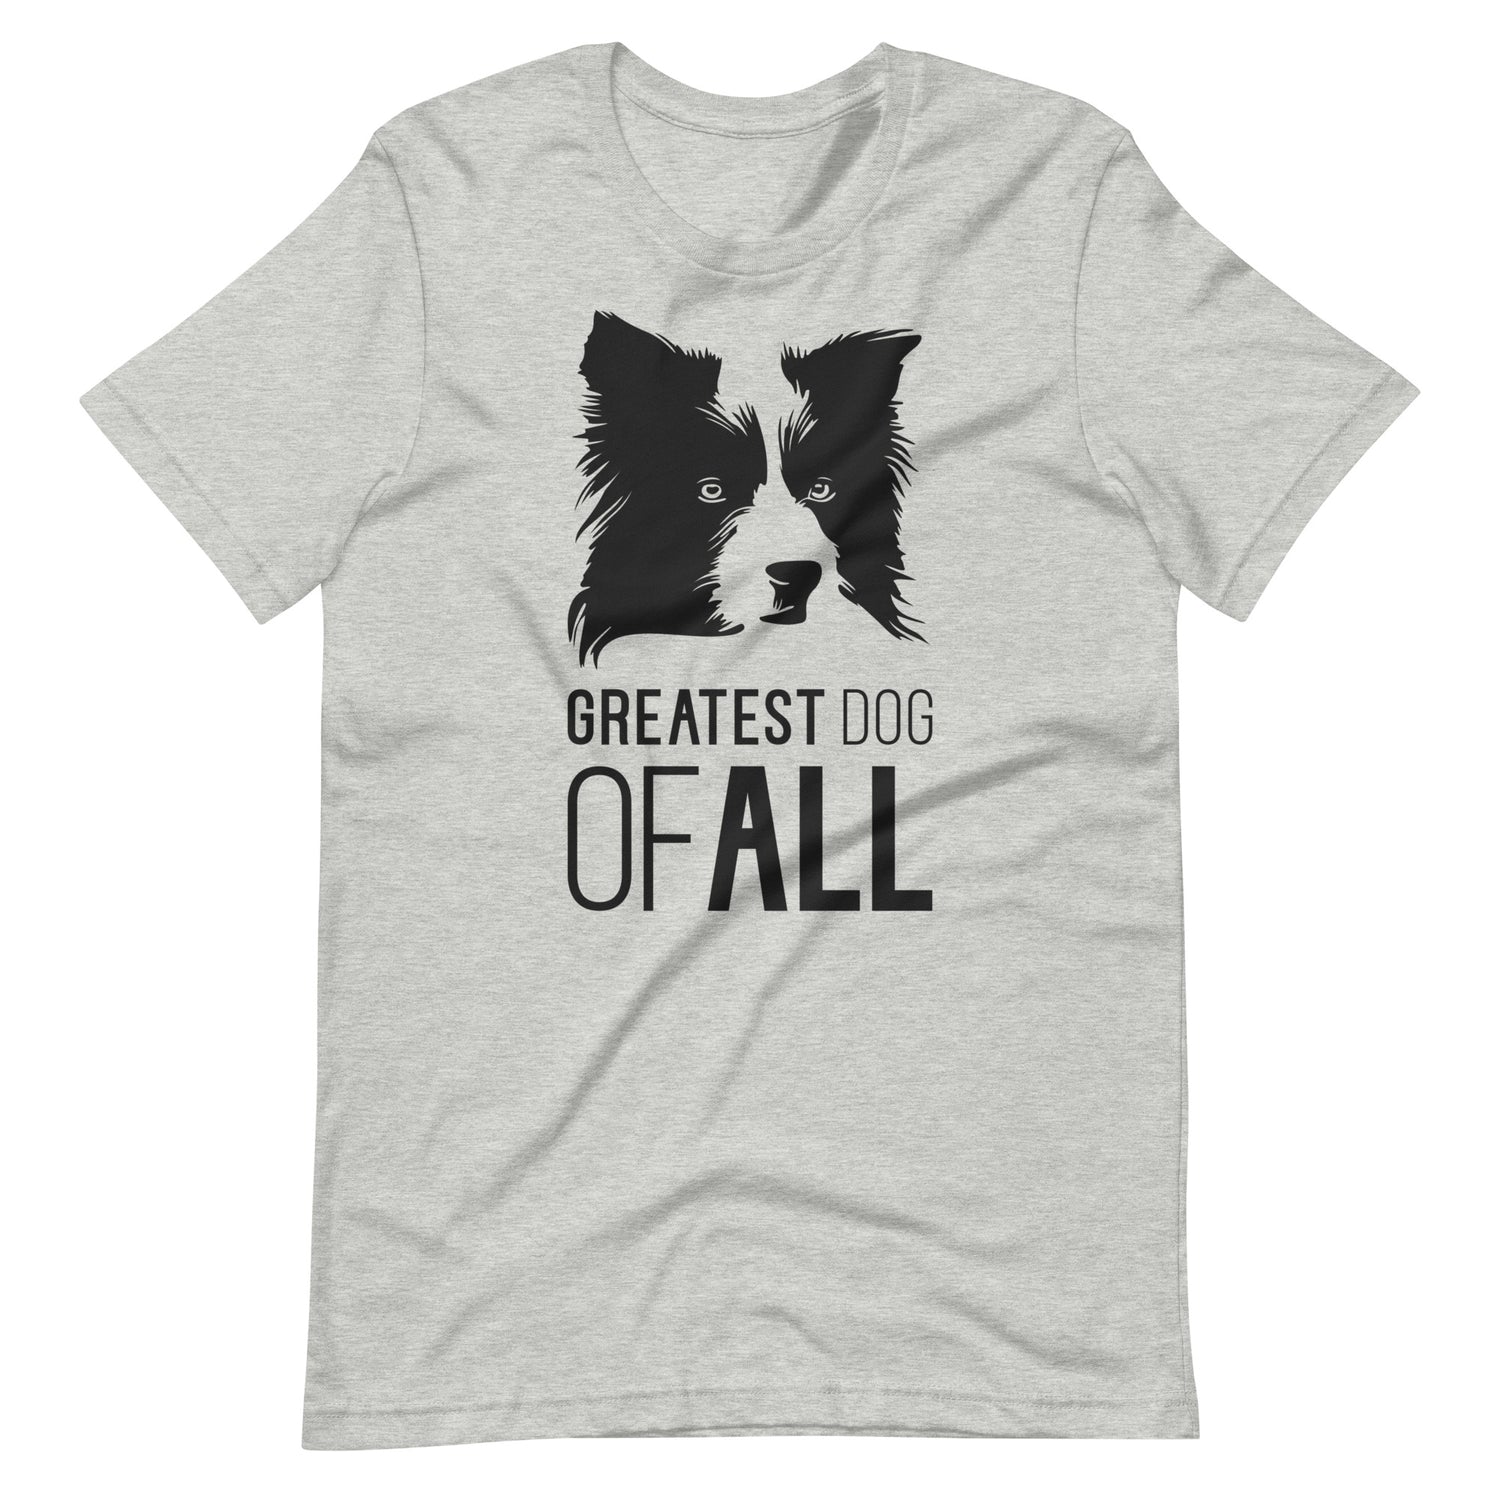 Black Border Collie face silhouette with Greatest Dog of All caption on unisex athletic heather t-shirt